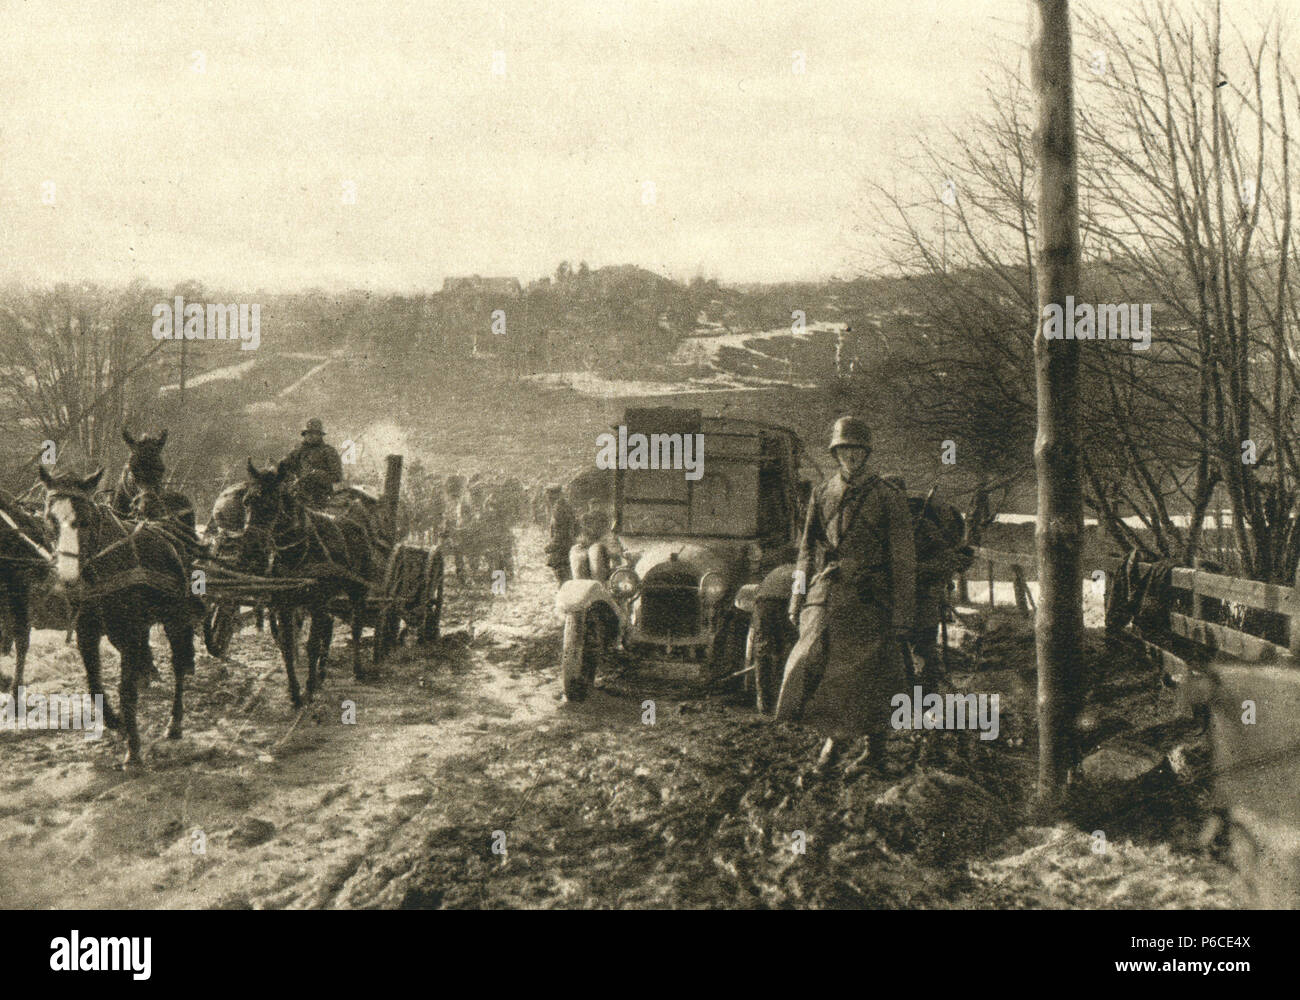 German soldiers, fighting column, eastern front, ww1, wwi, world war one Stock Photo